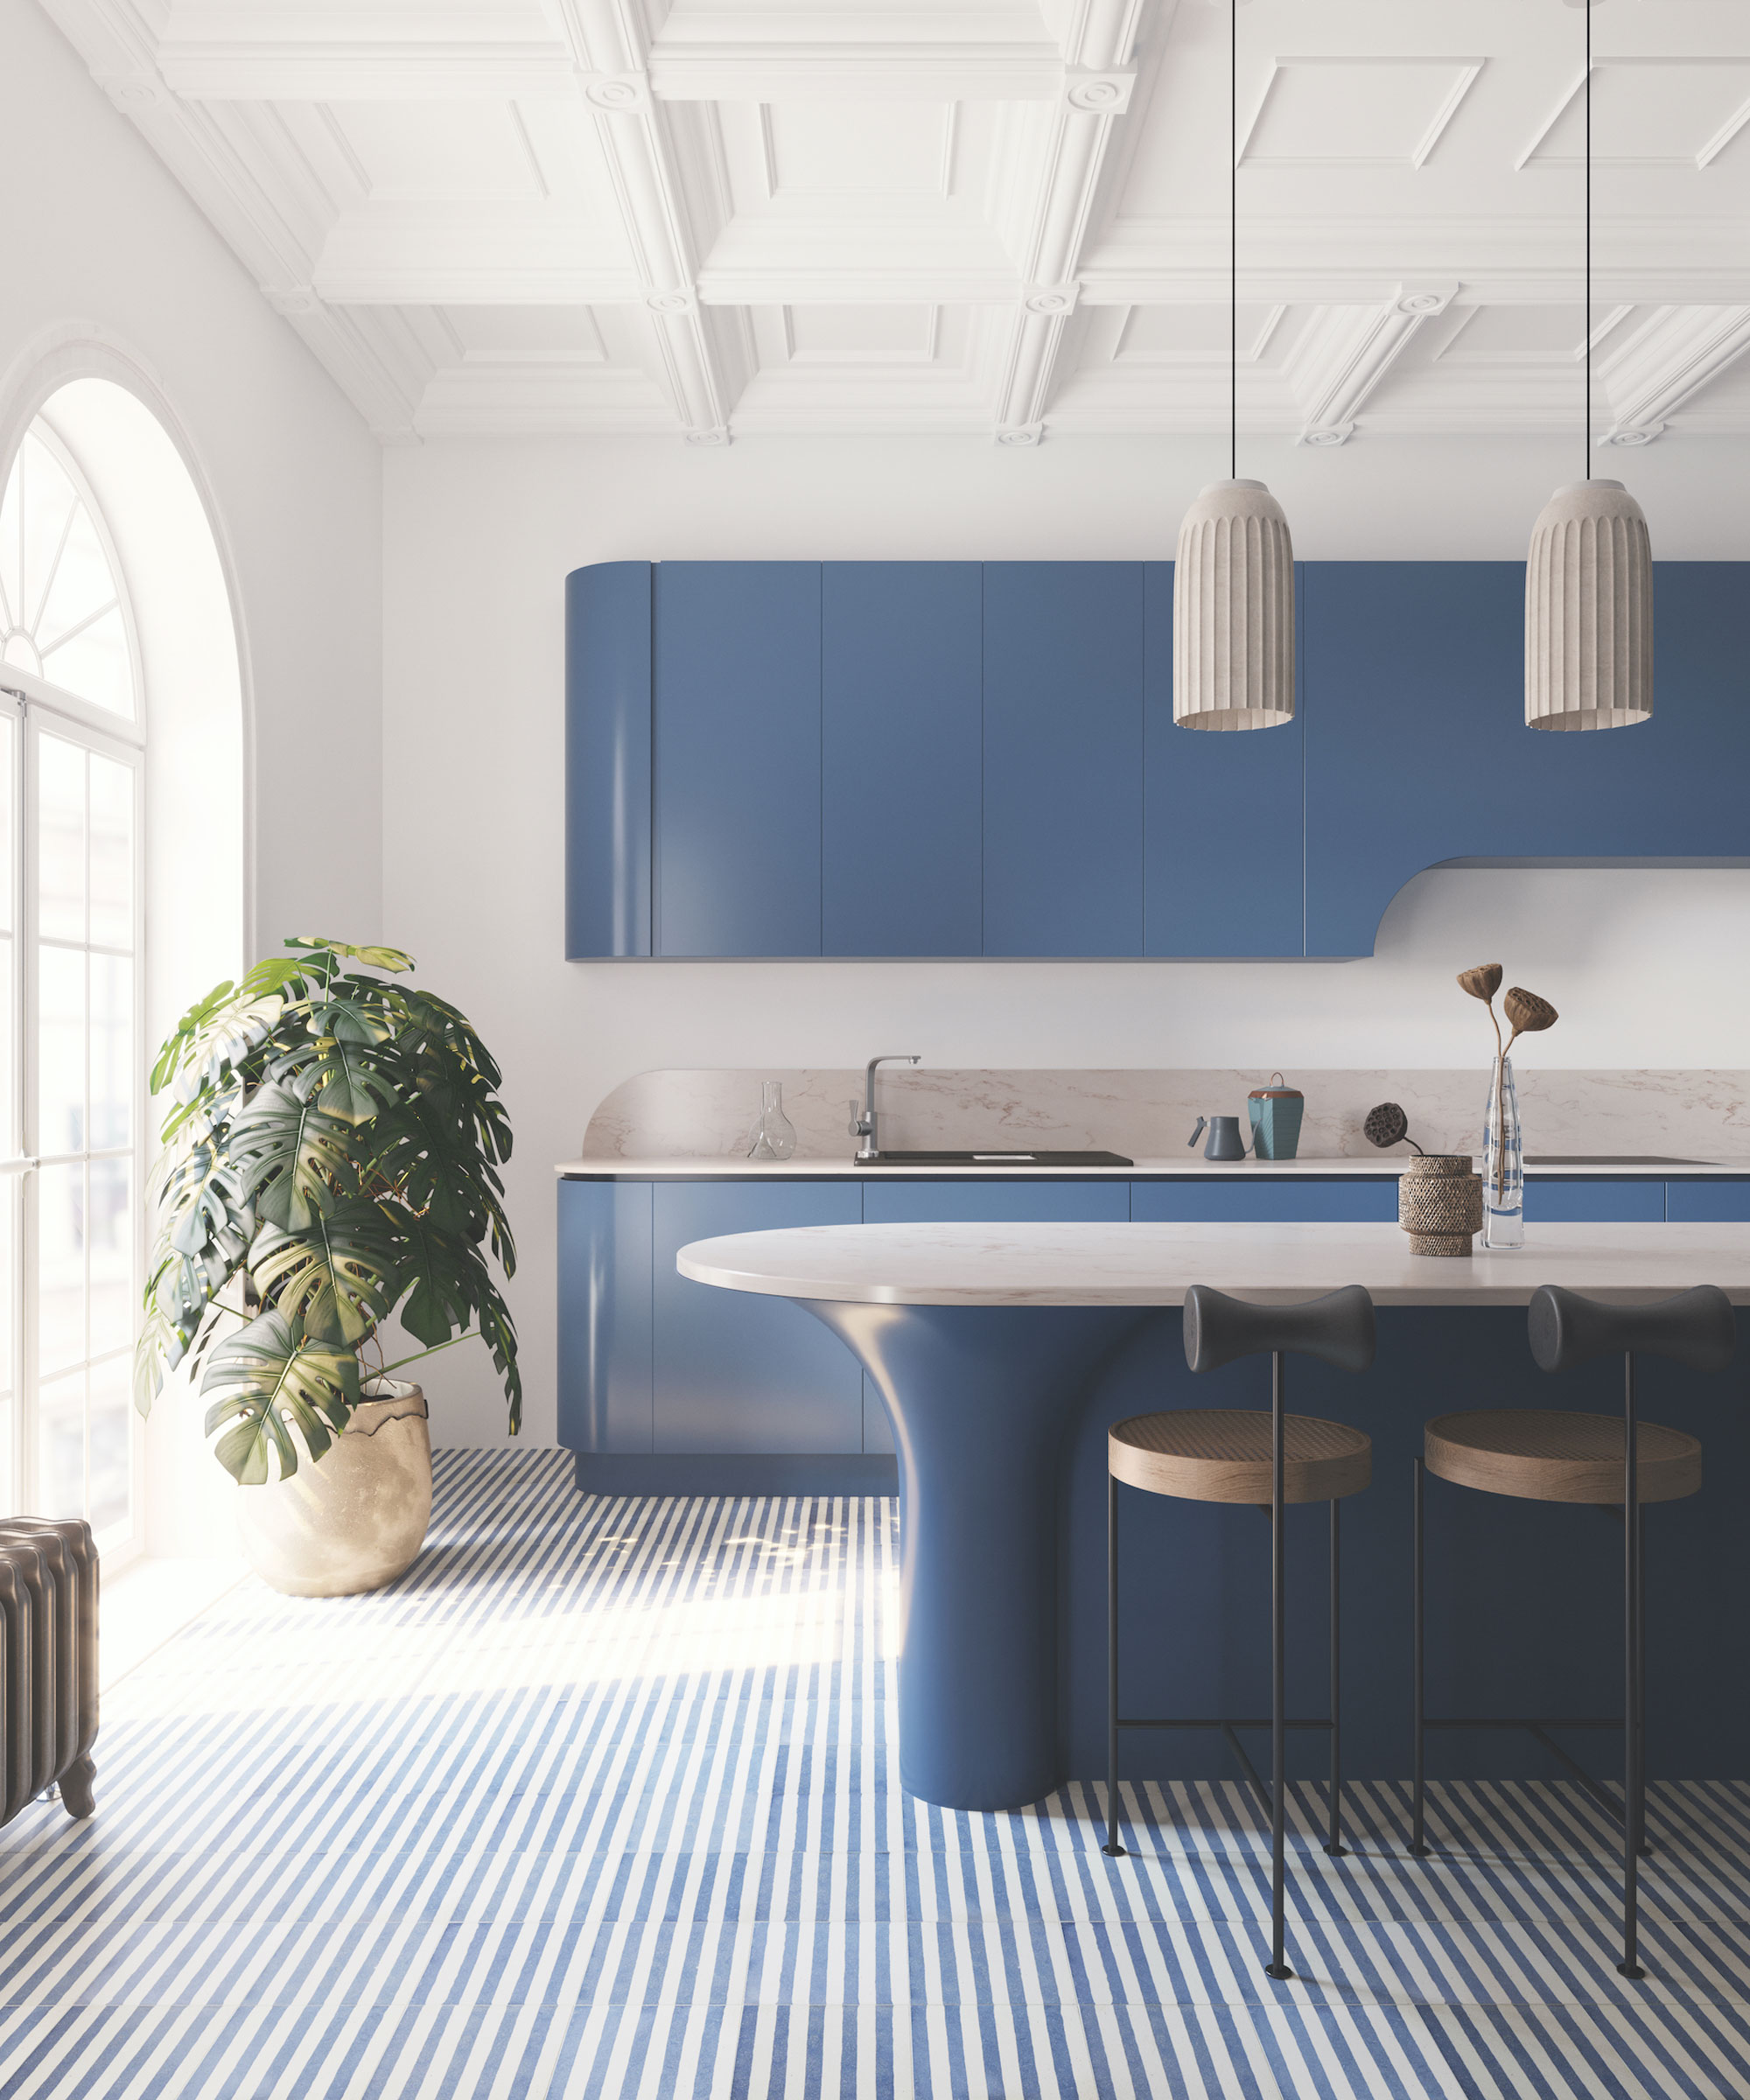 Contemporary kitchen space with blue striped tiled flooring, blue kitchen cabinets, oval shaped kitchen island with marble countertop, black and light wood counter chairs, large green plant in basket, two pendants hanging above island